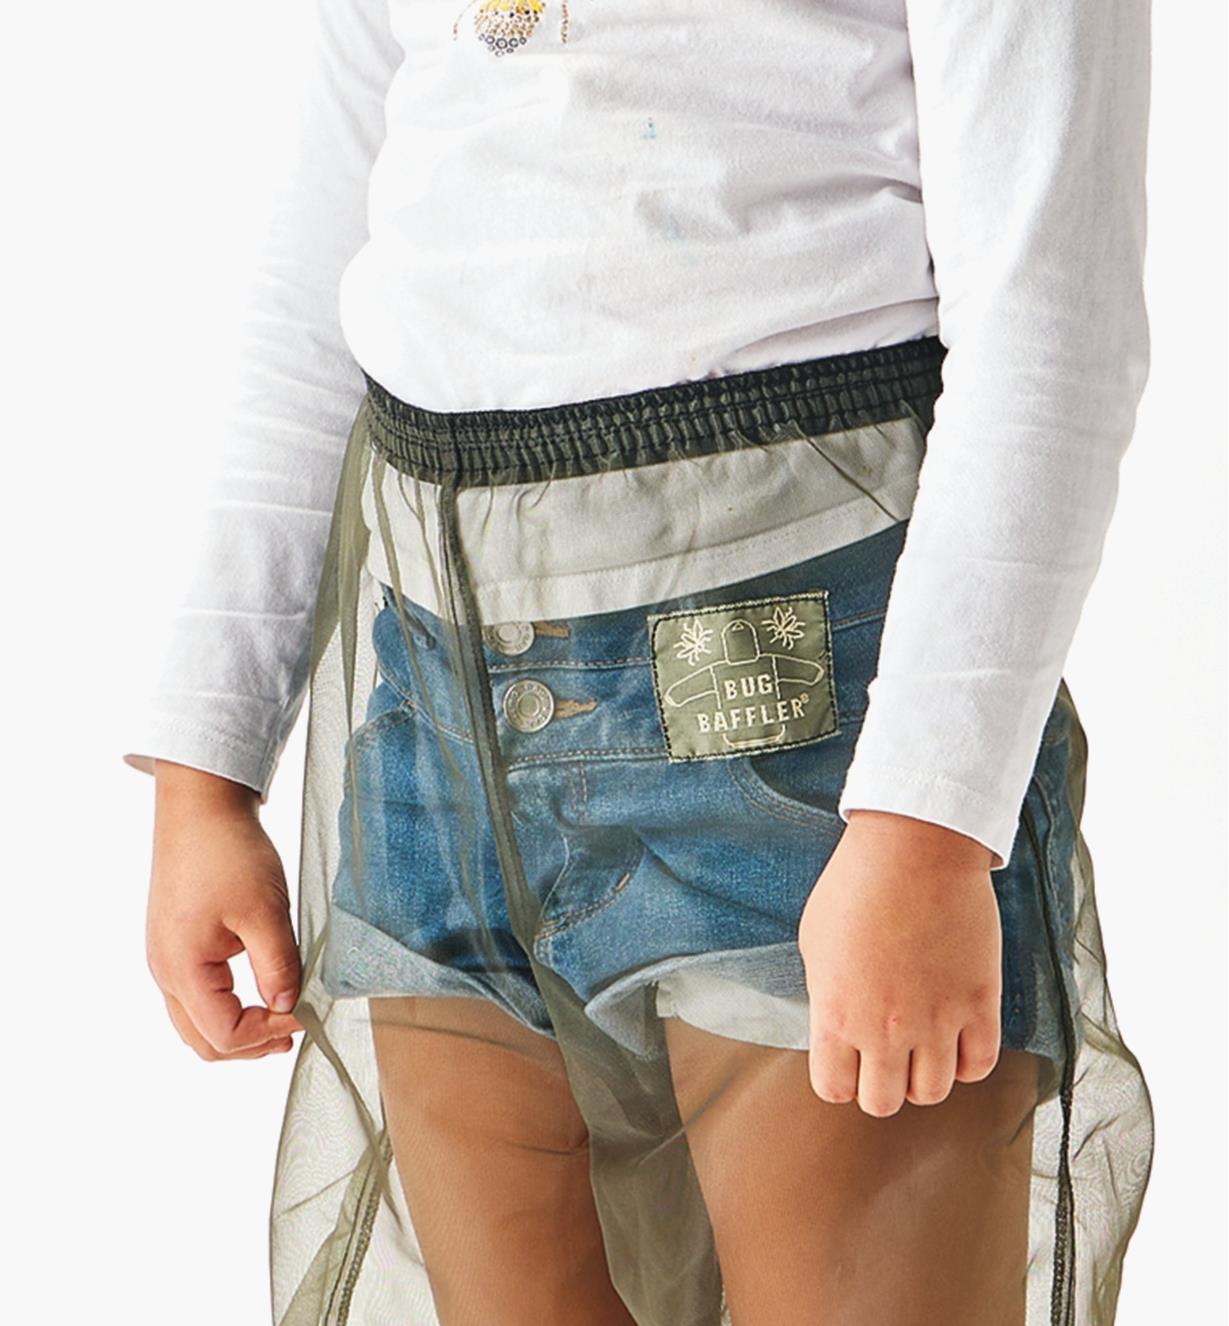 A close-up view of the elastic waistband on a pair of bug-protection pants worn by a child